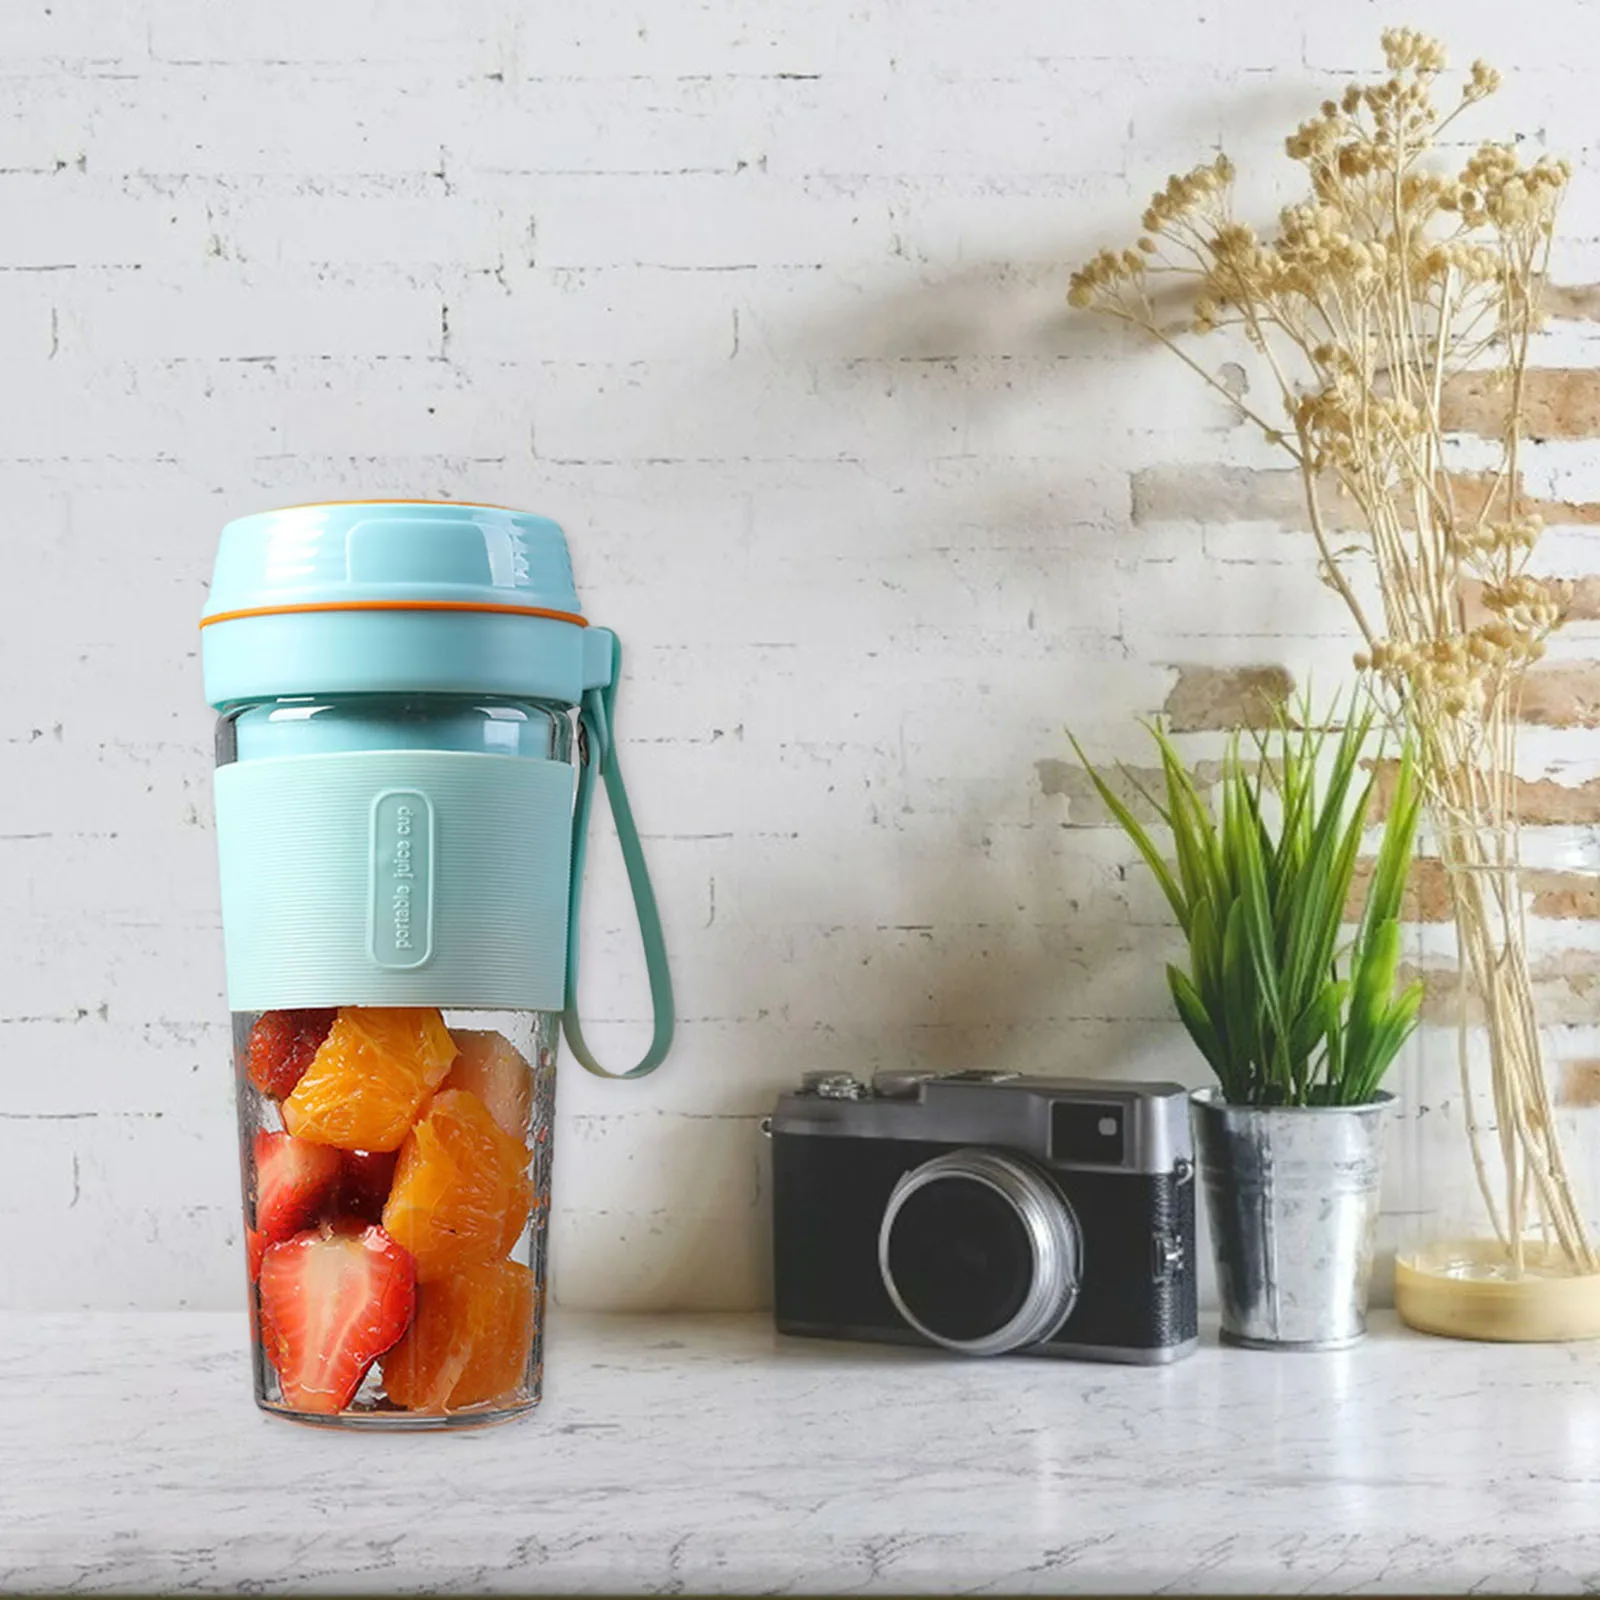 270ml Mini Portable Electric Fruit Juicer USB Rechargeable Smoothie Maker Blender Machine Juicing Cup